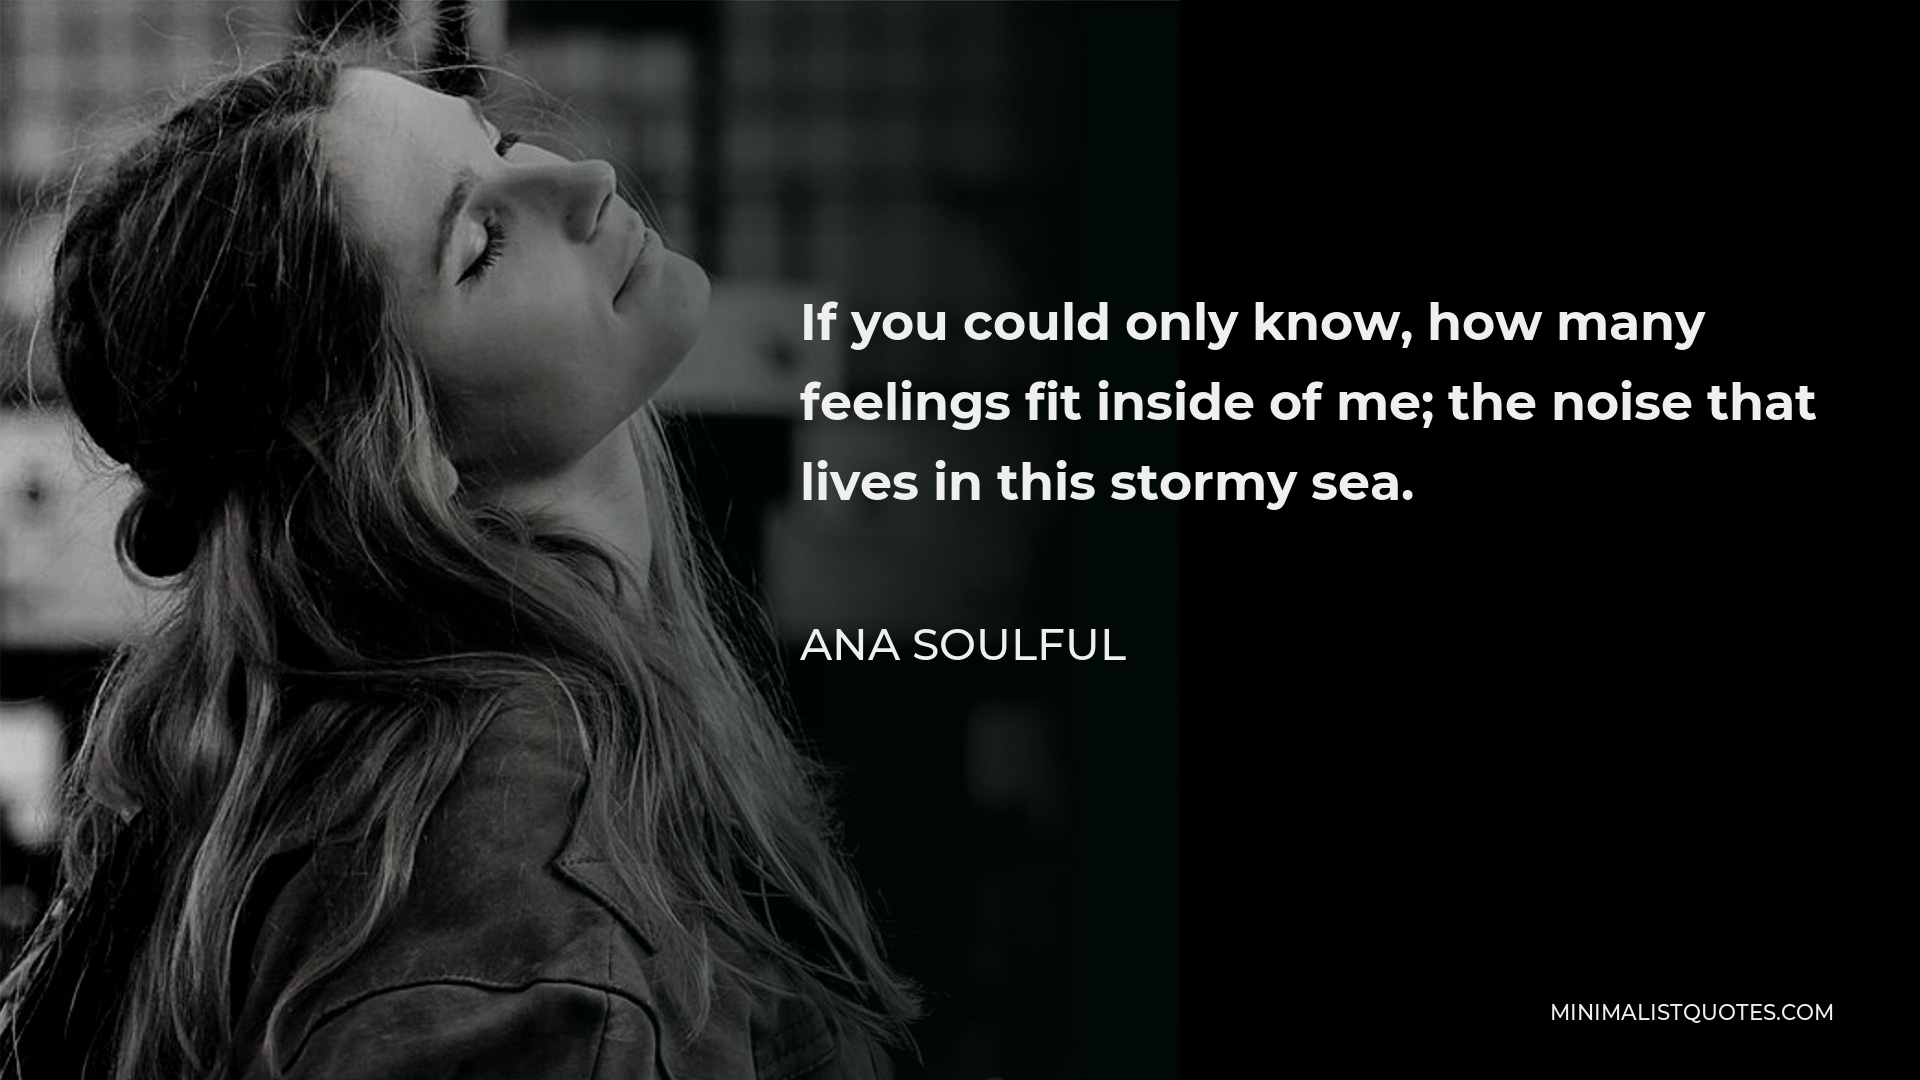 Ana Soulful Quote - If you could only know, how many feelings fit inside me; the noise that lives in this stormy sea.